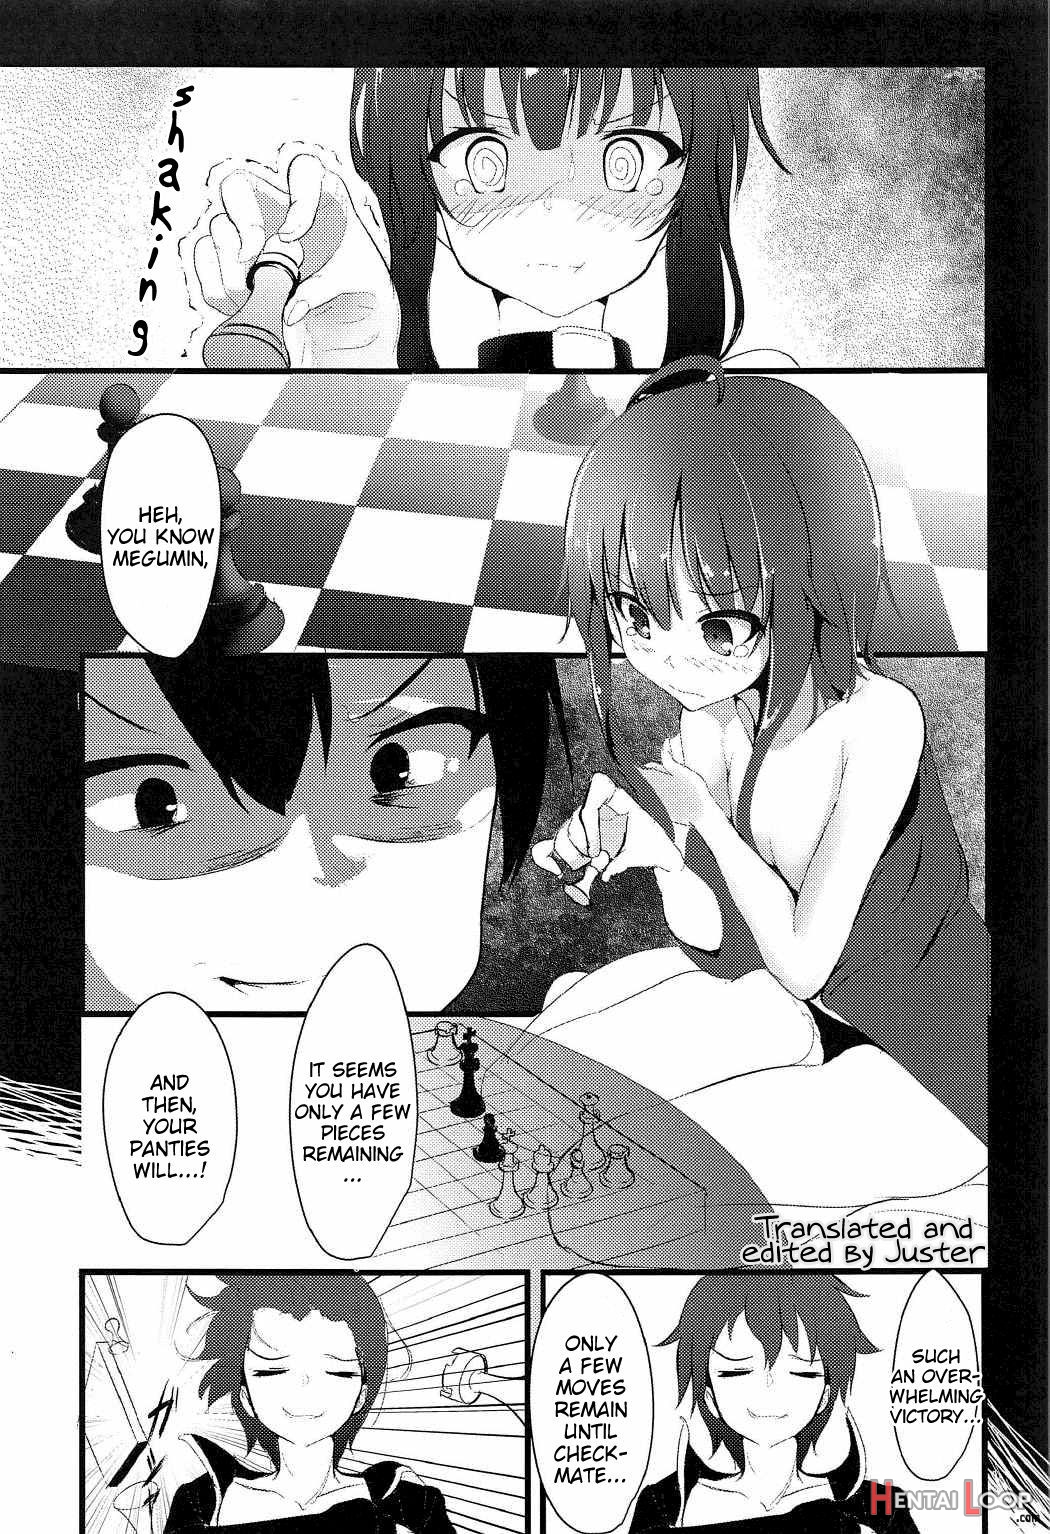 Megumin page 2